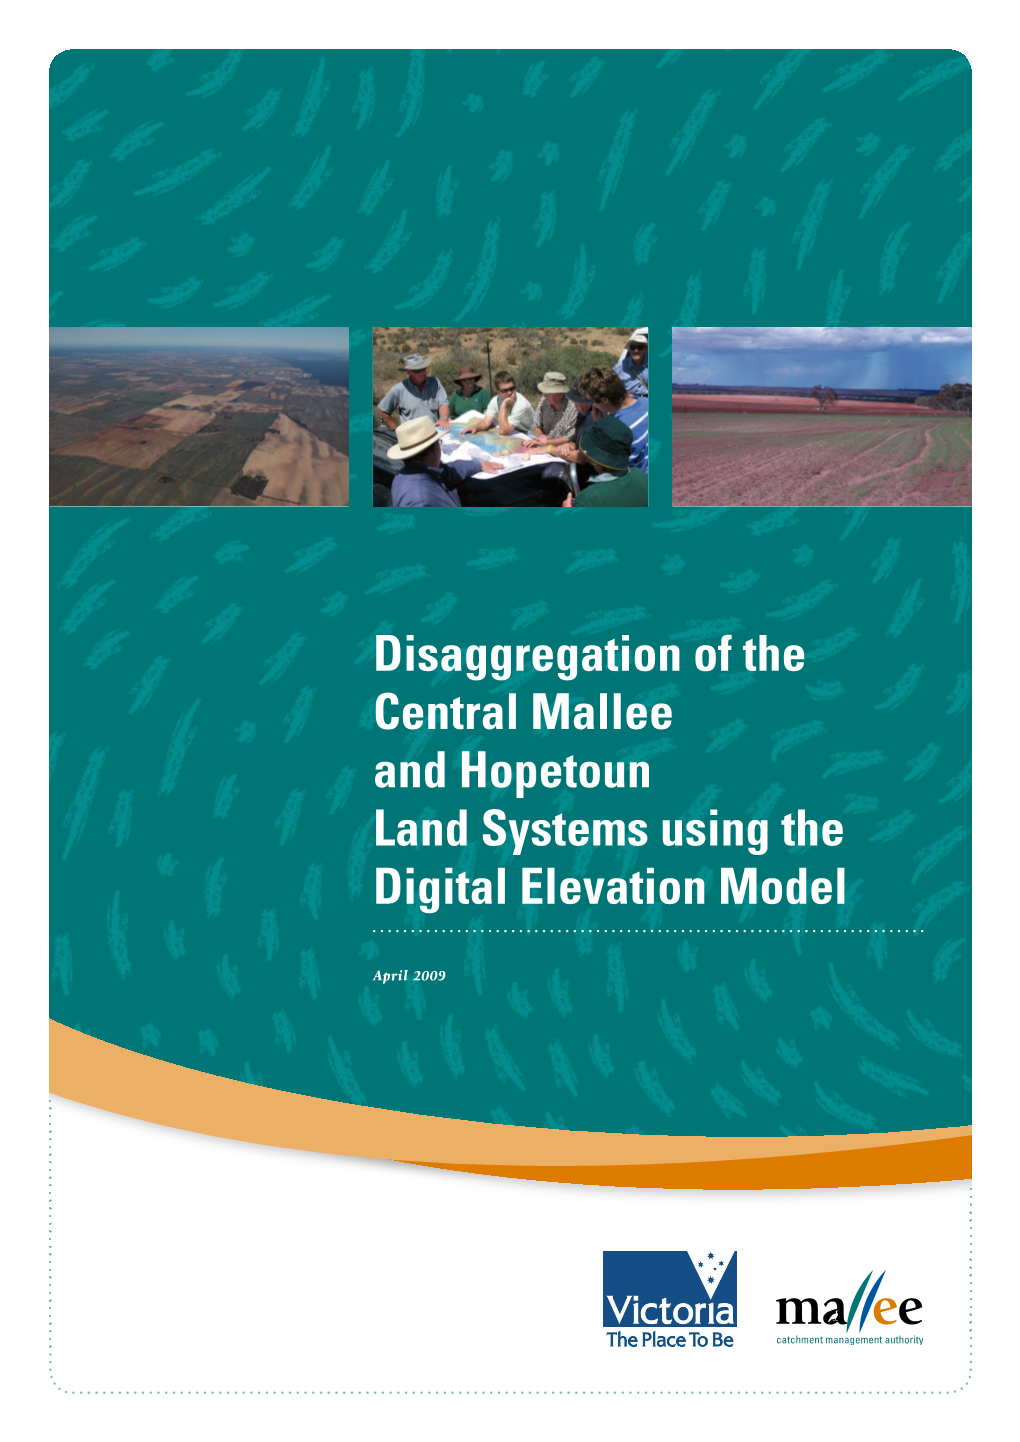 Disaggregation of the Central Mallee and Hopetoun Land Systems Using the Digital Elevation Model